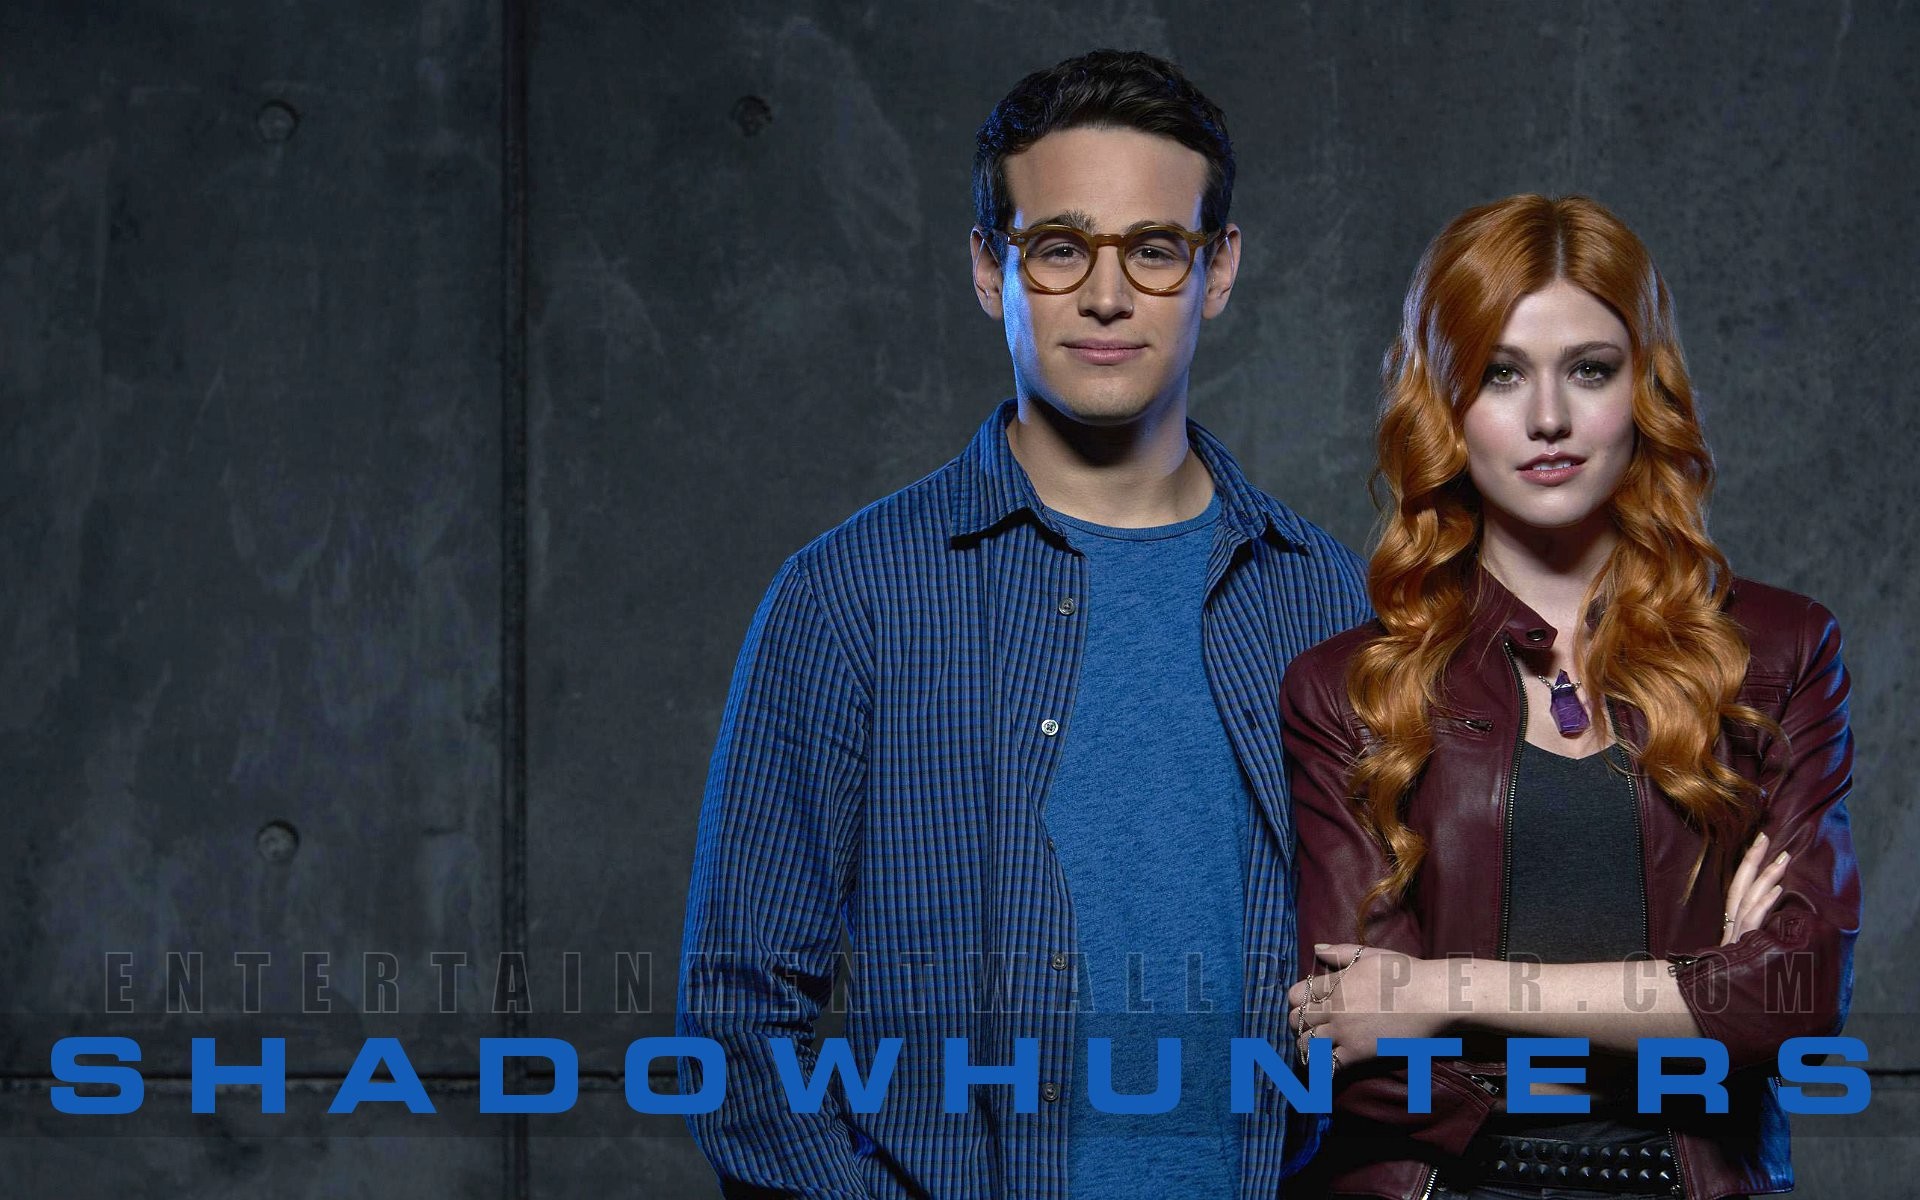 1920x1200 Shadowhunters Wallpaper - Original size, download now.